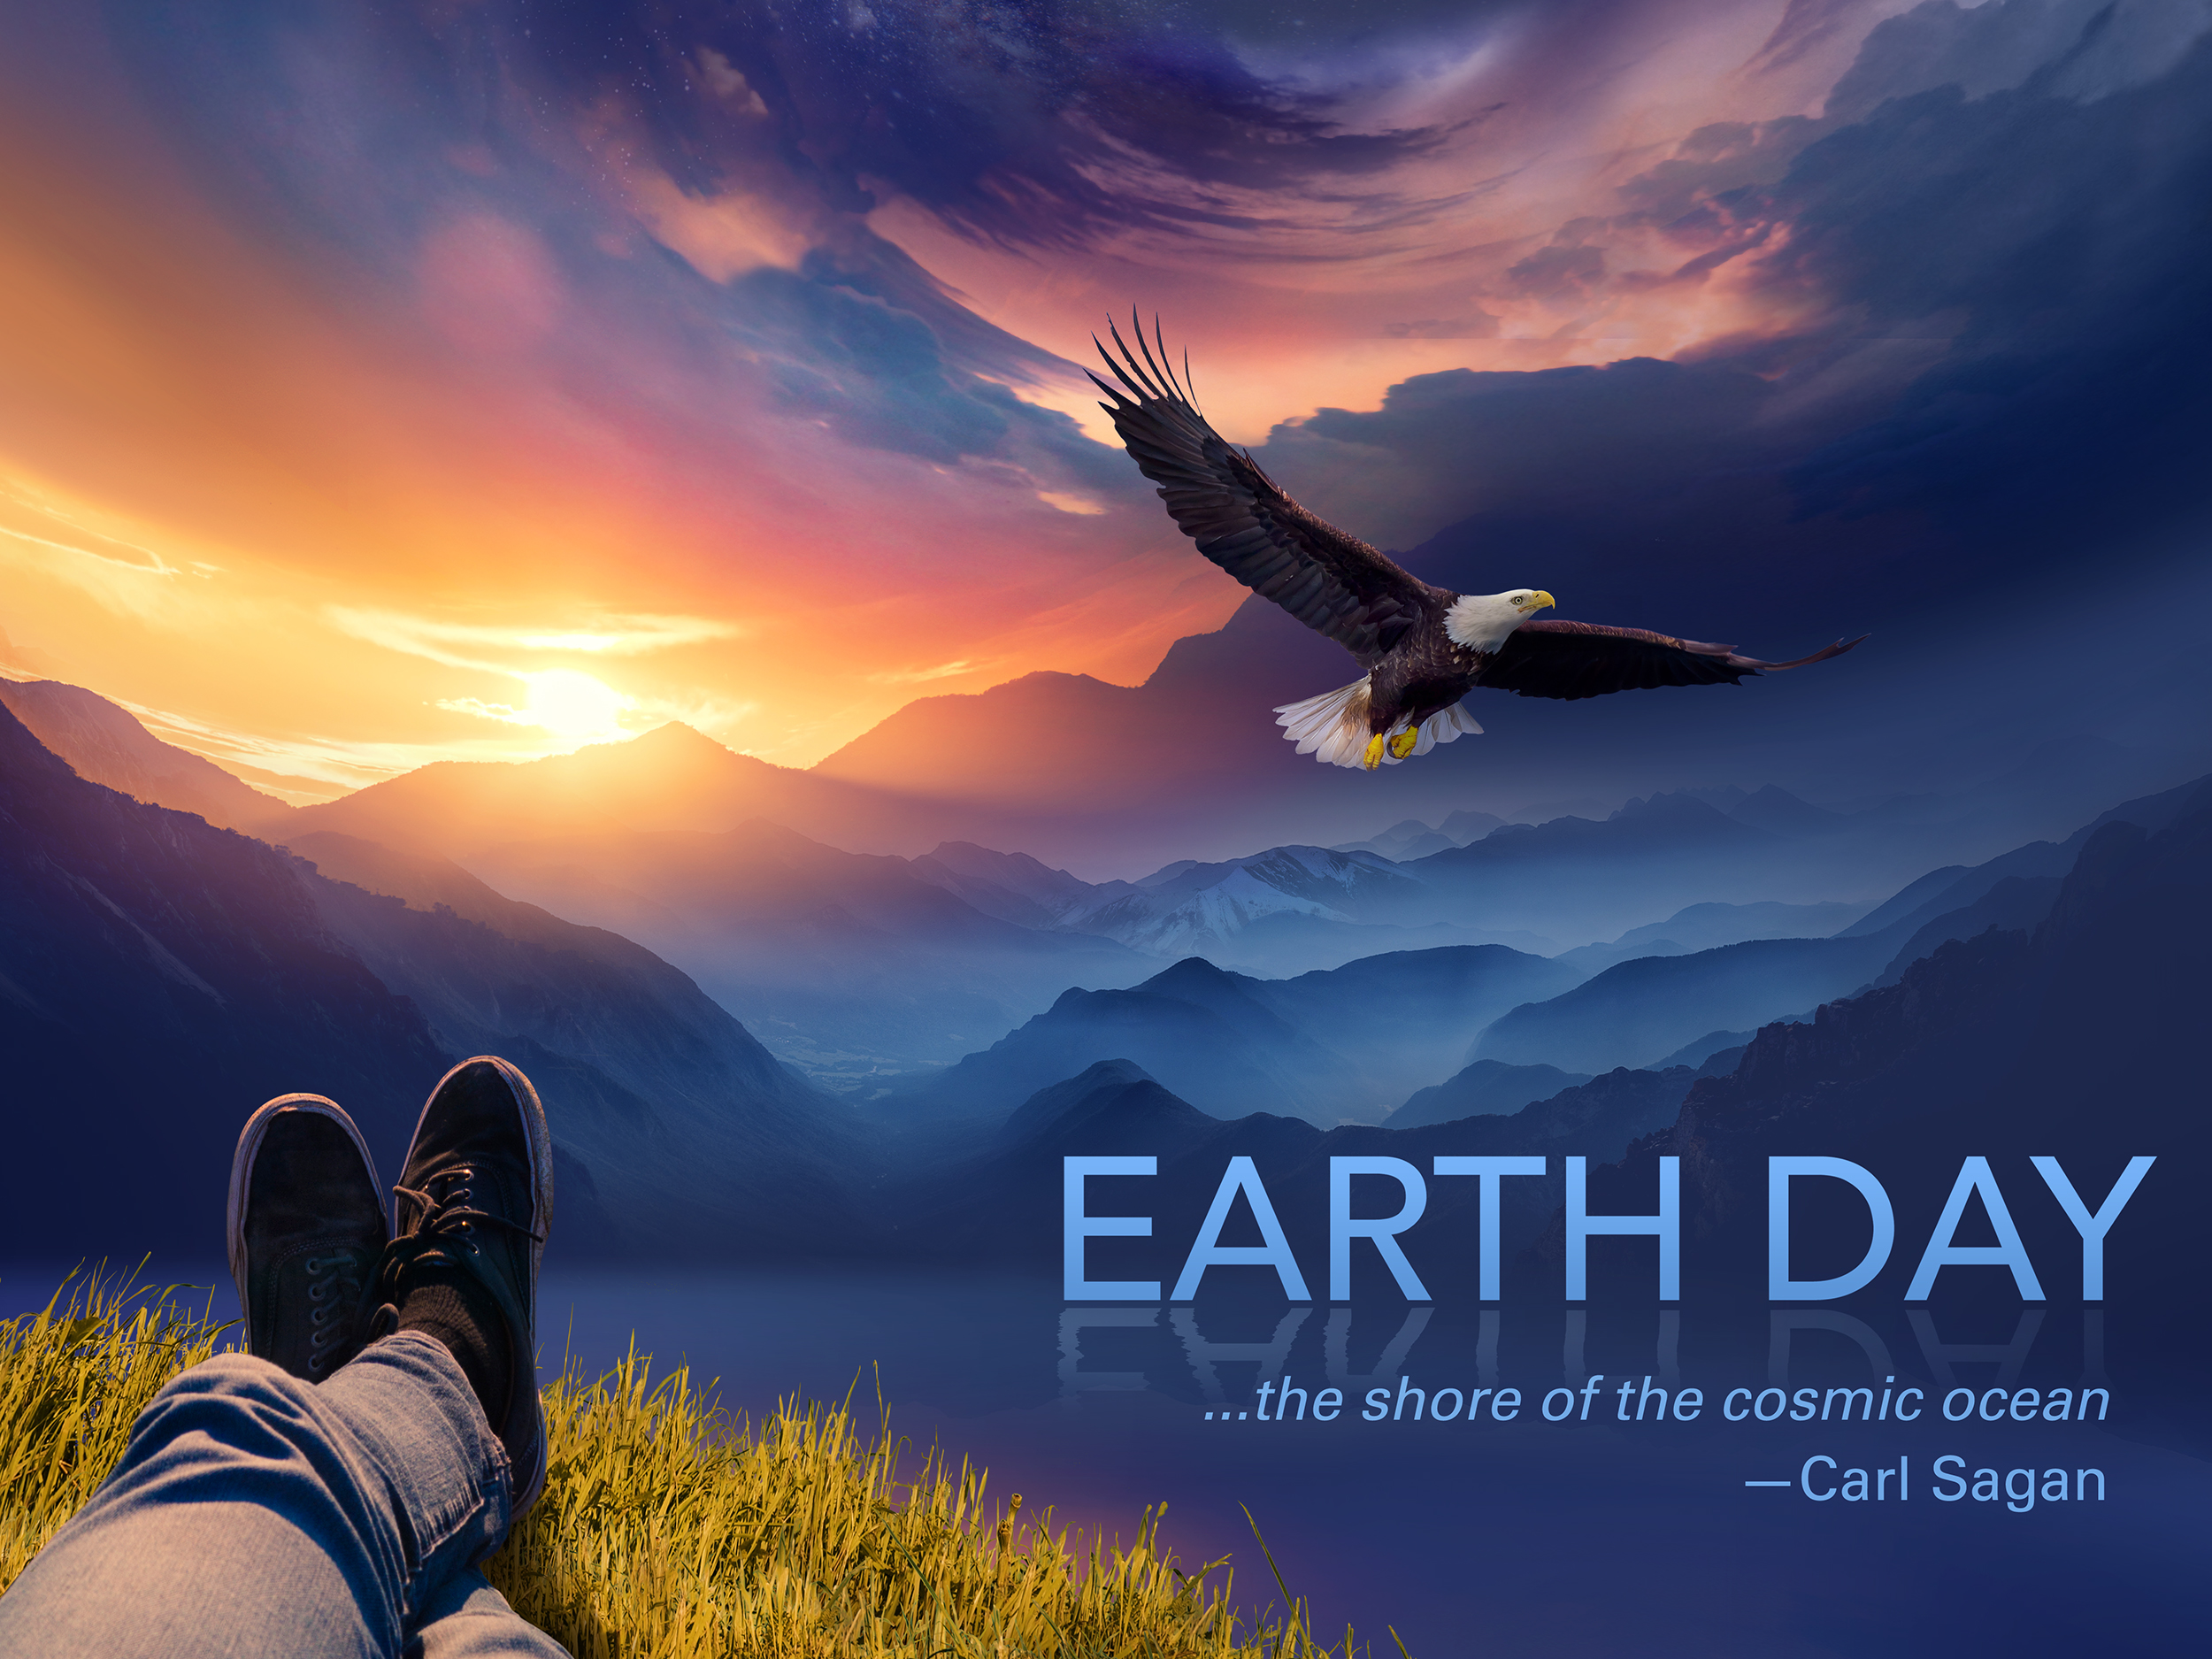 Earth Day 2018 poster